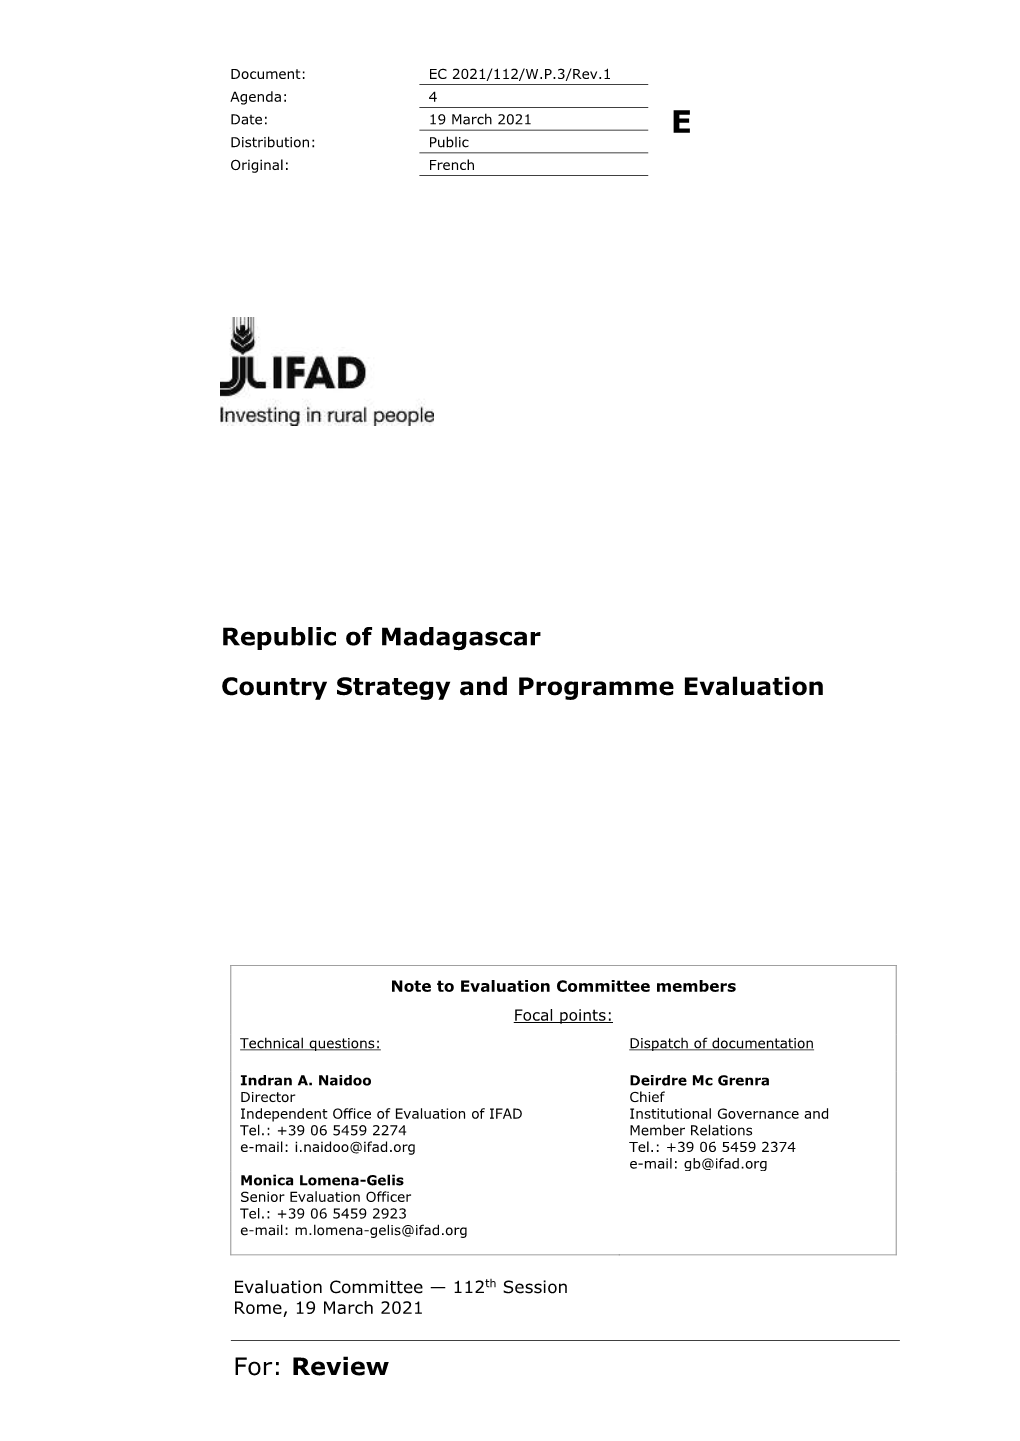 For: Review Republic of Madagascar Country Strategy and Programme